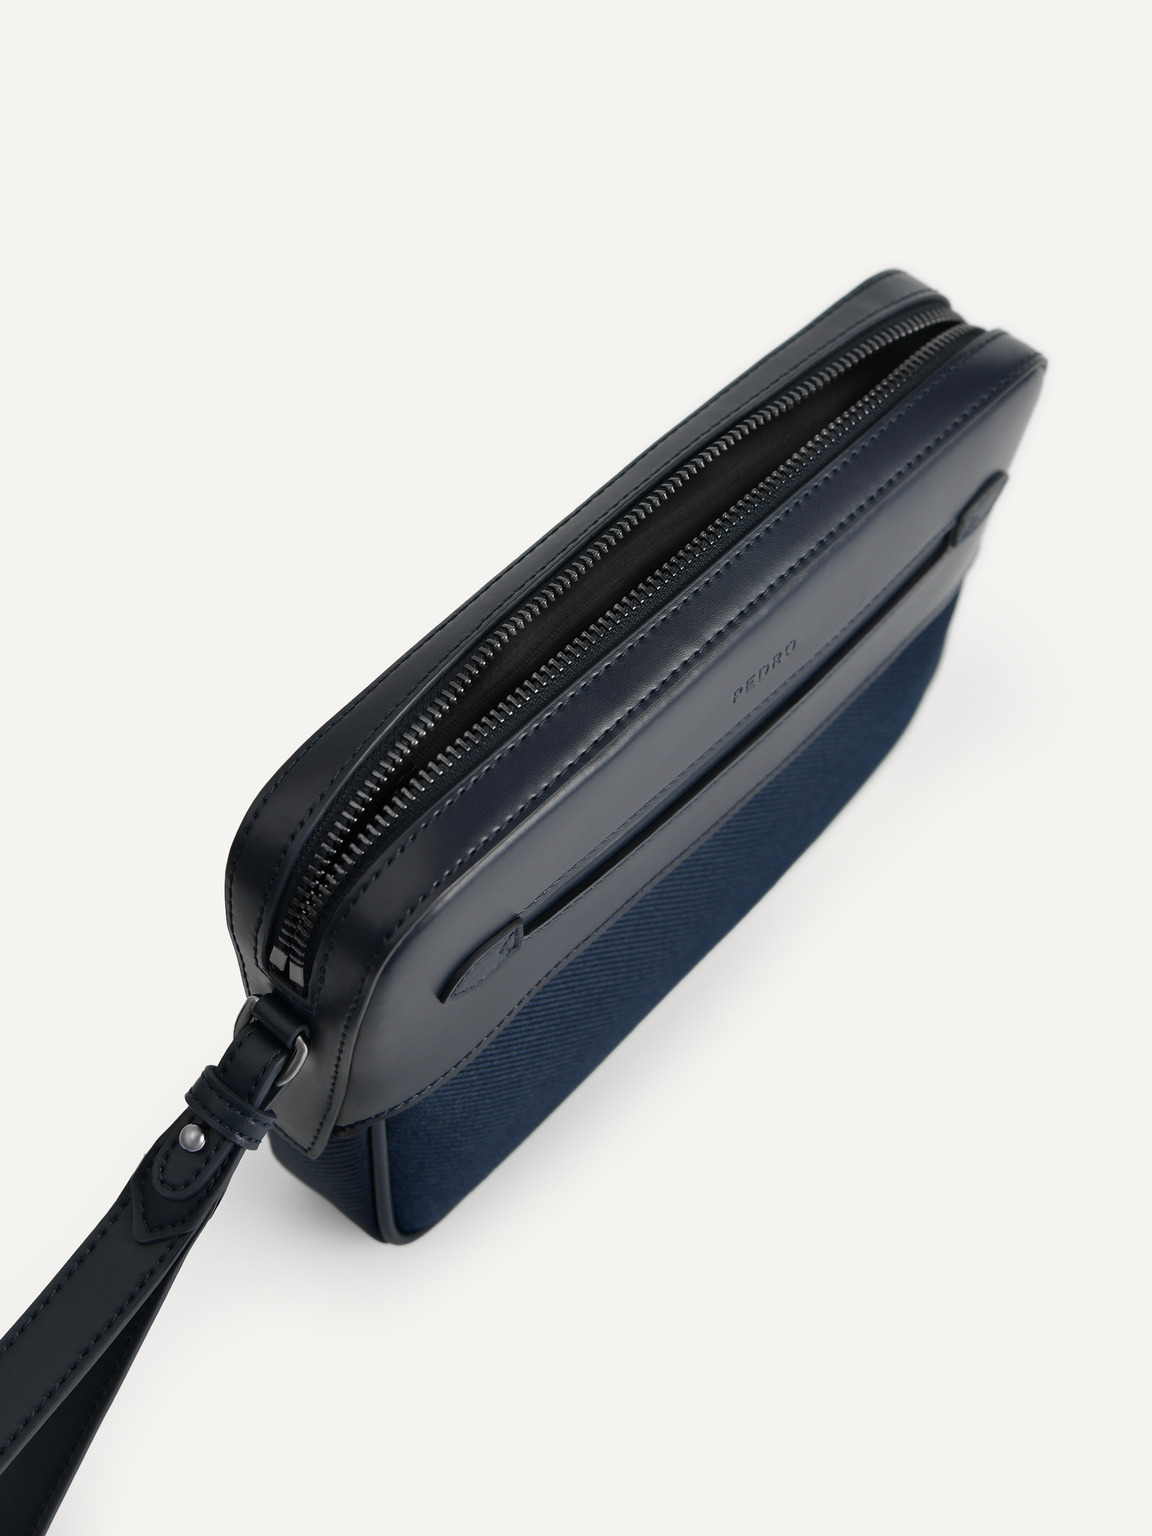 Leather Clutch, Navy